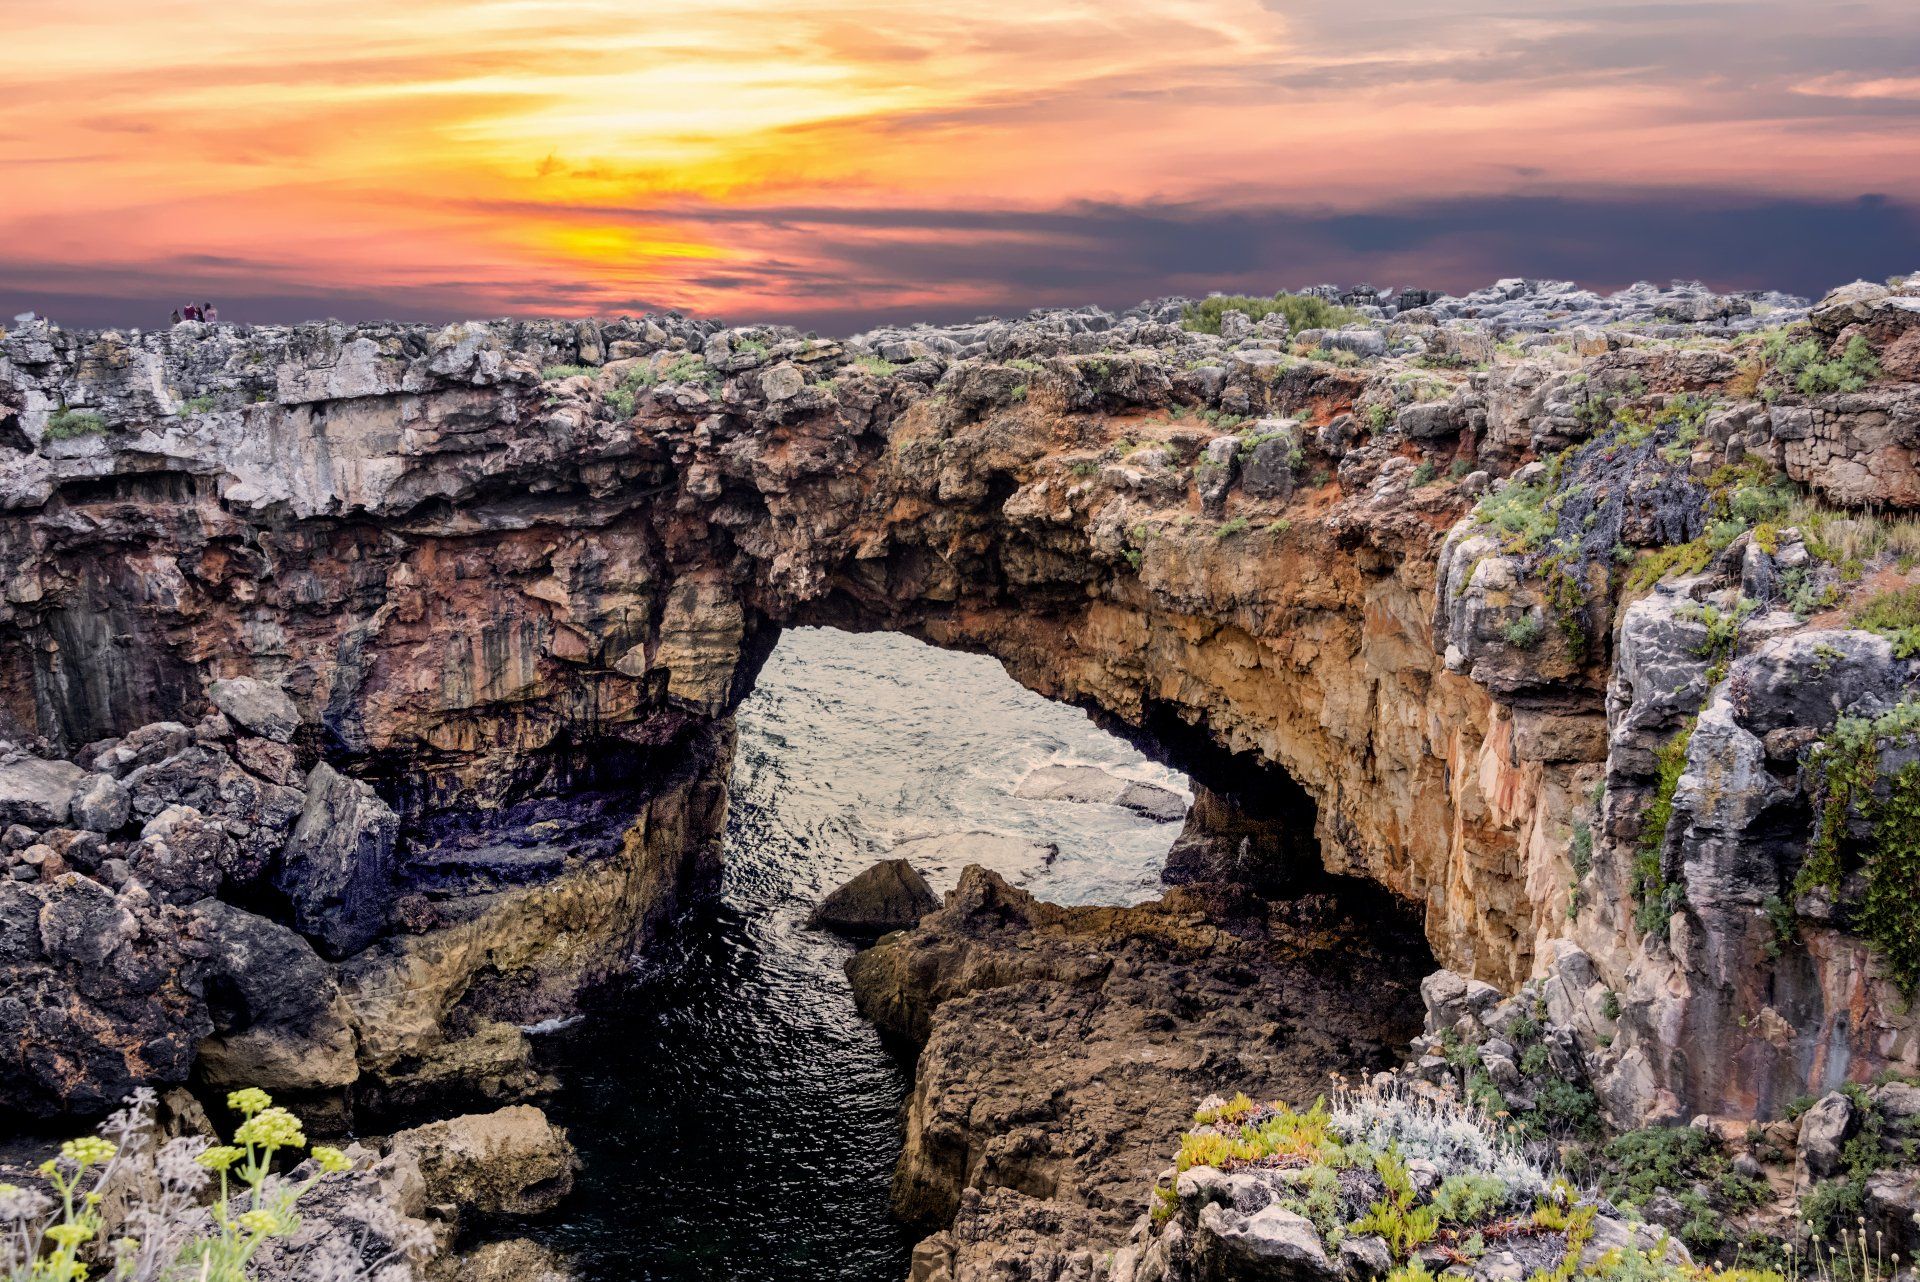 a sunset over a rocky cliff with a cave in the middle of it .